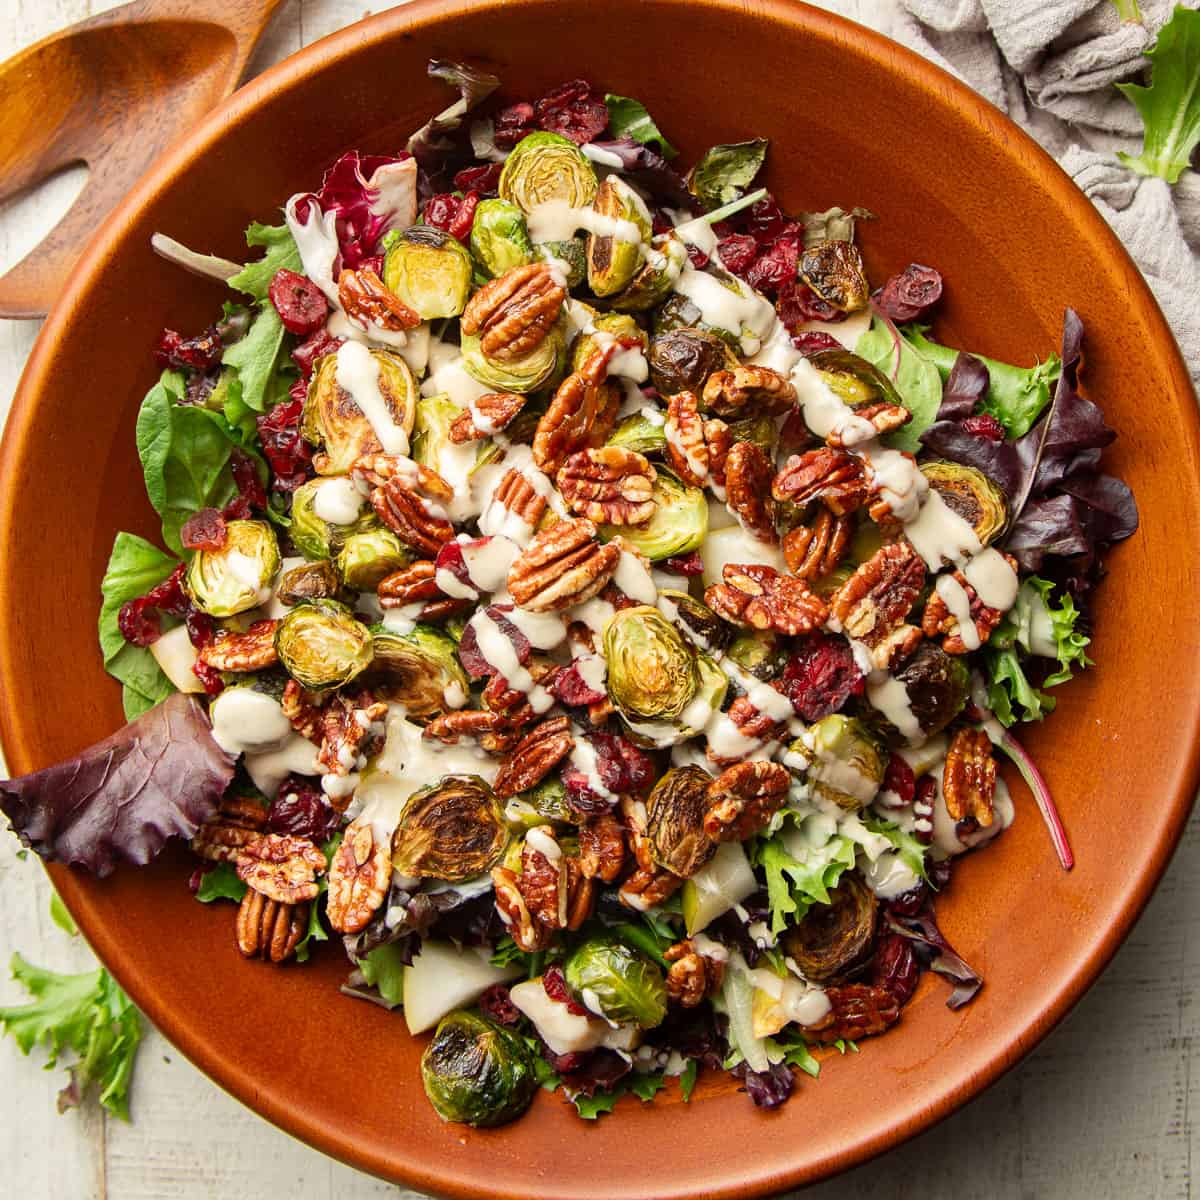 Wooden bowl of salad with pecans, brussels sprouts, dried cranberries and diced pears.